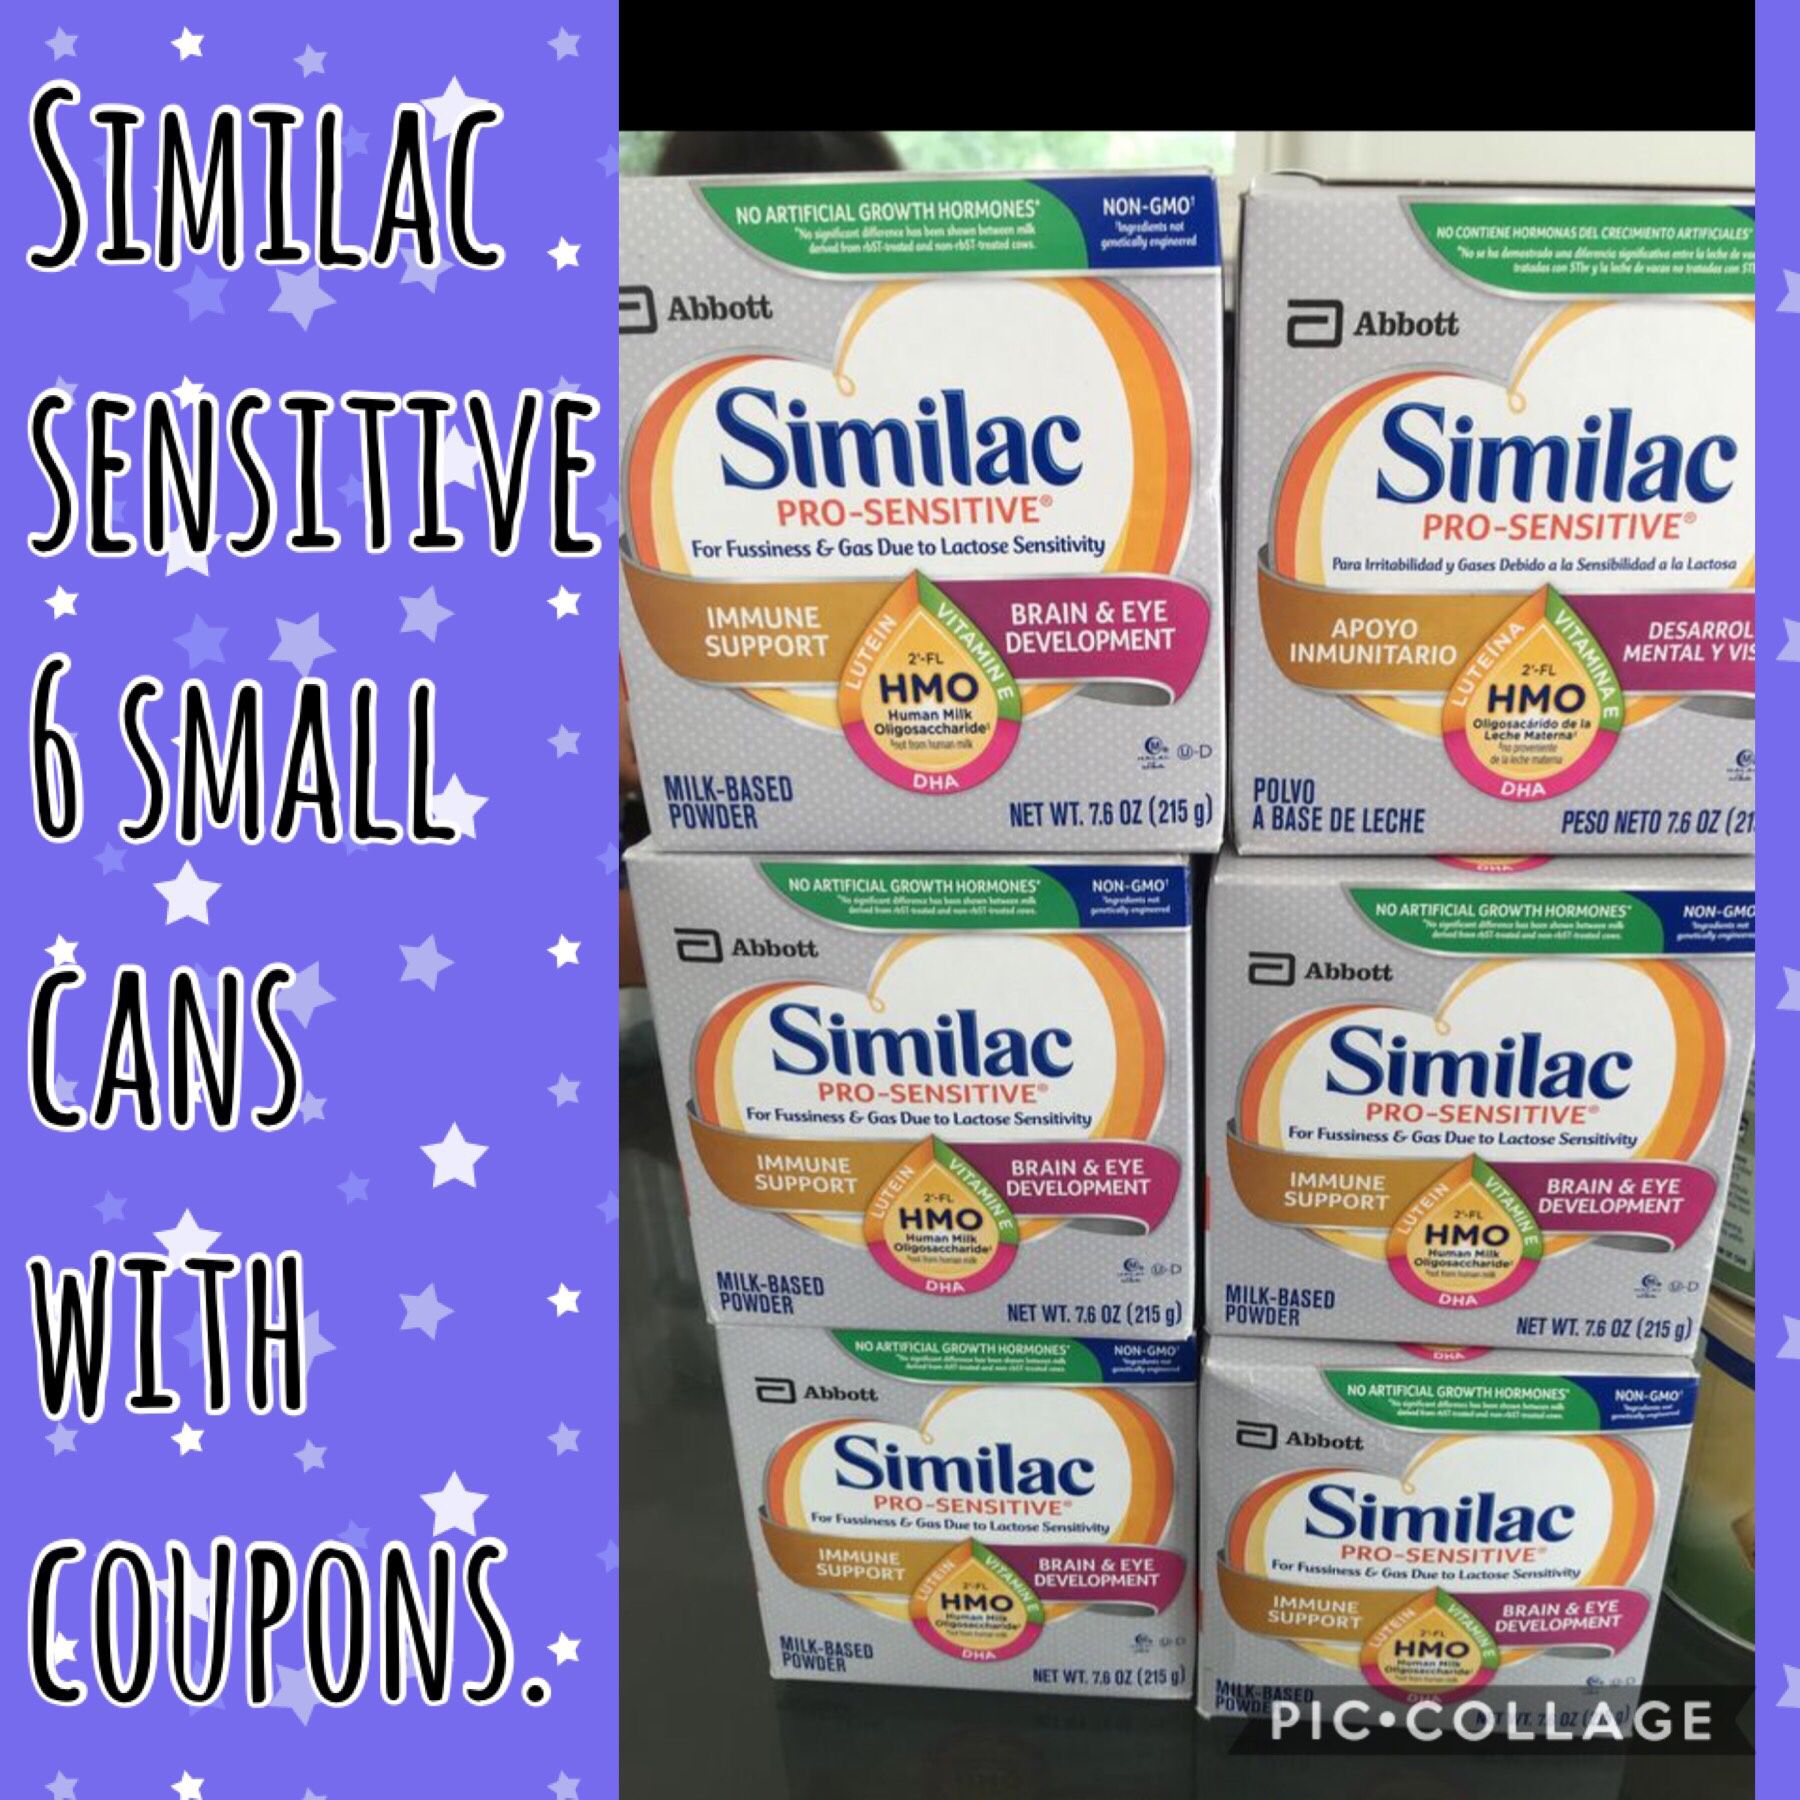 Small cans of formula new with coupons.